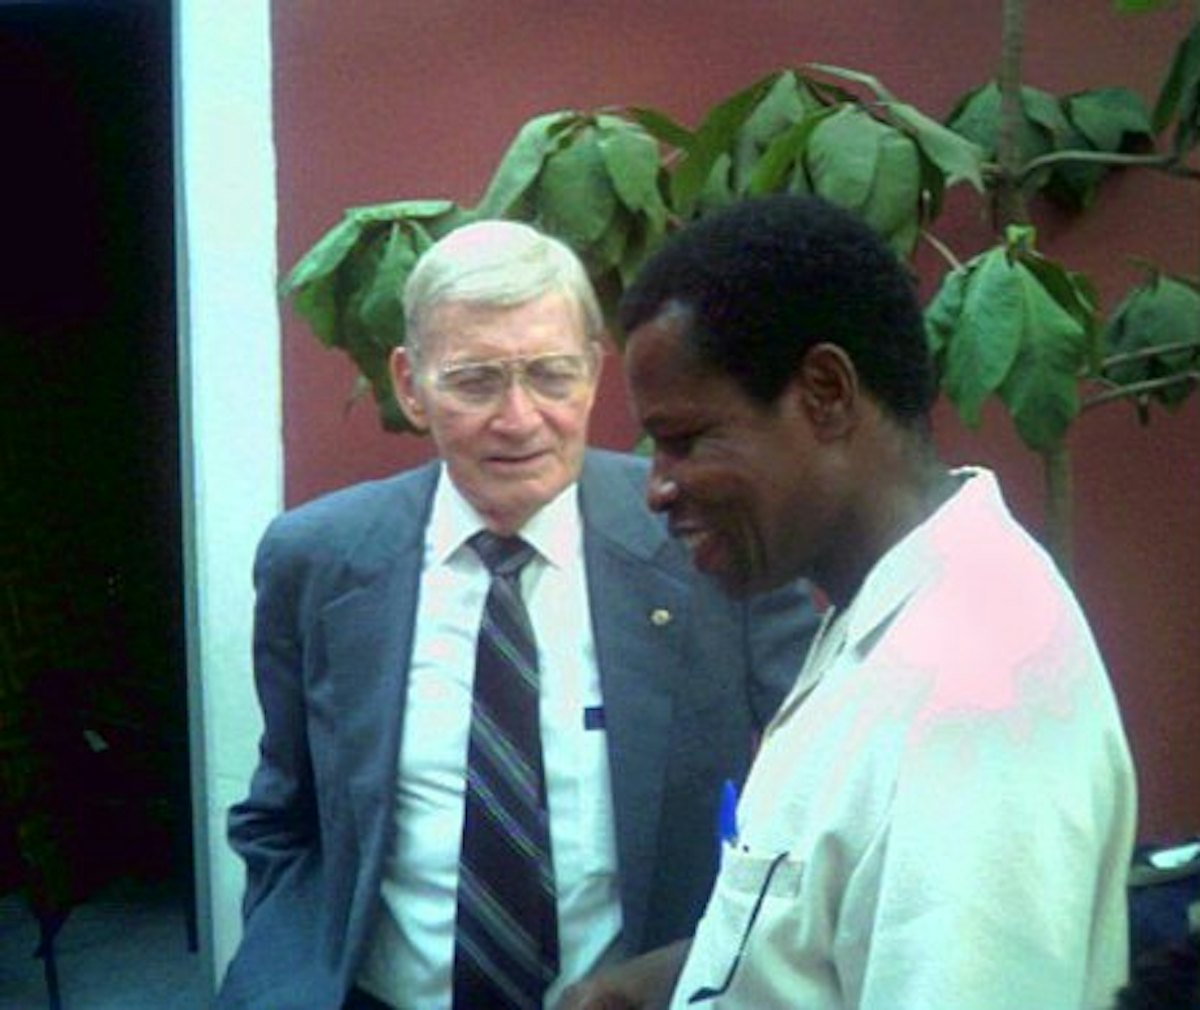 Howard Menking (left) with a member of the Continental Board of Counsellors in Africa, Kobina Fynn, at the jubilee celebrations of the Cape Verde Baha'i community.